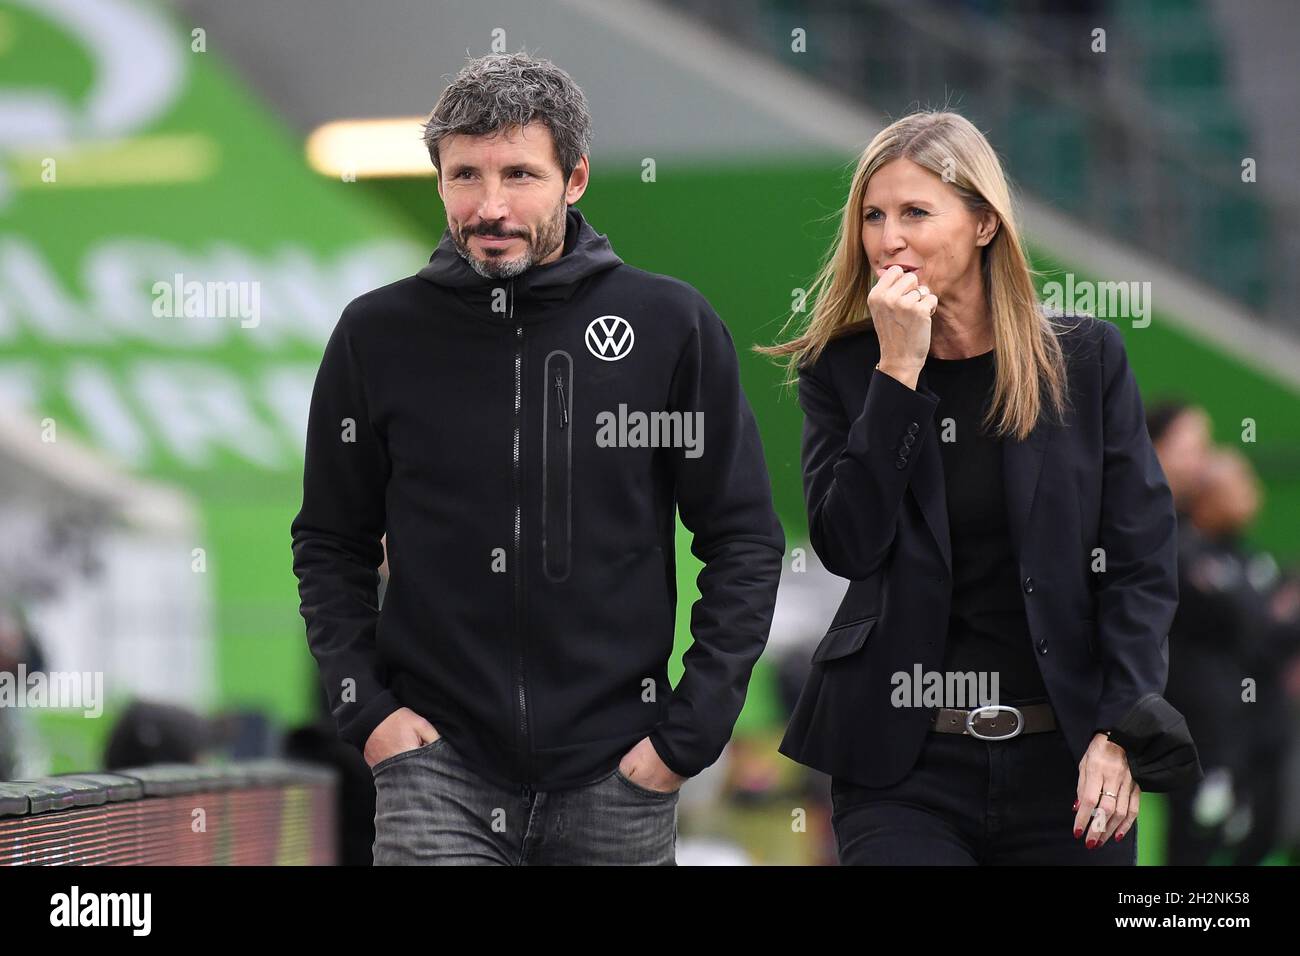 Wolfsburg, Germany. 23rd Oct, 2021. Football: Bundesliga, VfL Wolfsburg - SC Freiburg, Matchday 9 at the Volkswagen Arena. Wolfsburg coach Mark van Bommel is in the stadium with VfL press officer Barbara Ertel-Leicht before the match. Credit: Swen Pförtner/dpa - IMPORTANT NOTE: In accordance with the regulations of the DFL Deutsche Fußball Liga and/or the DFB Deutscher Fußball-Bund, it is prohibited to use or have used photographs taken in the stadium and/or of the match in the form of sequence pictures and/or video-like photo series./dpa/Alamy Live News Stock Photo